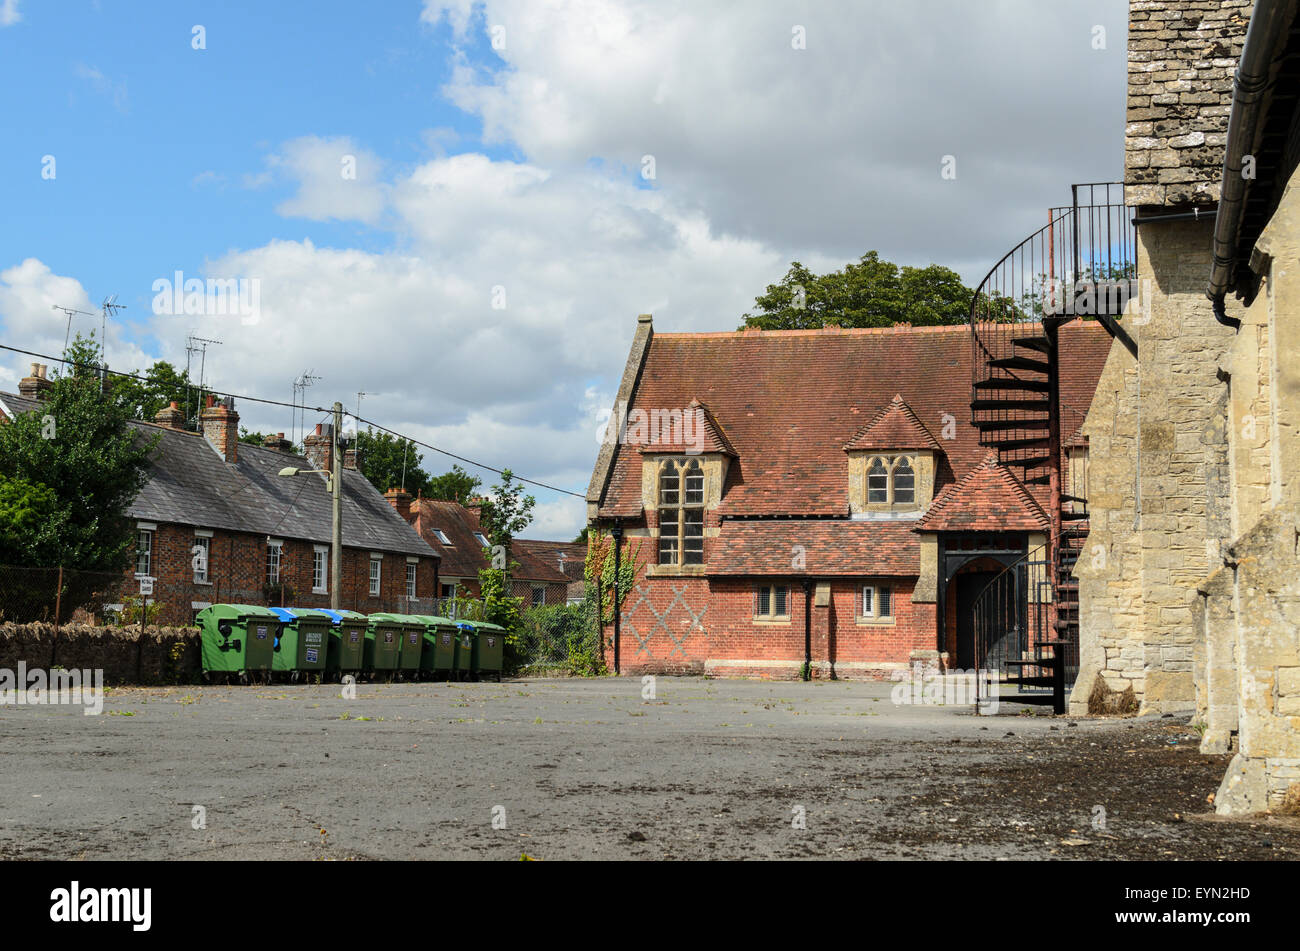 A schoolyard at King Alfred's School, Wantage, Oxfordshire, England, UK Stock Photo